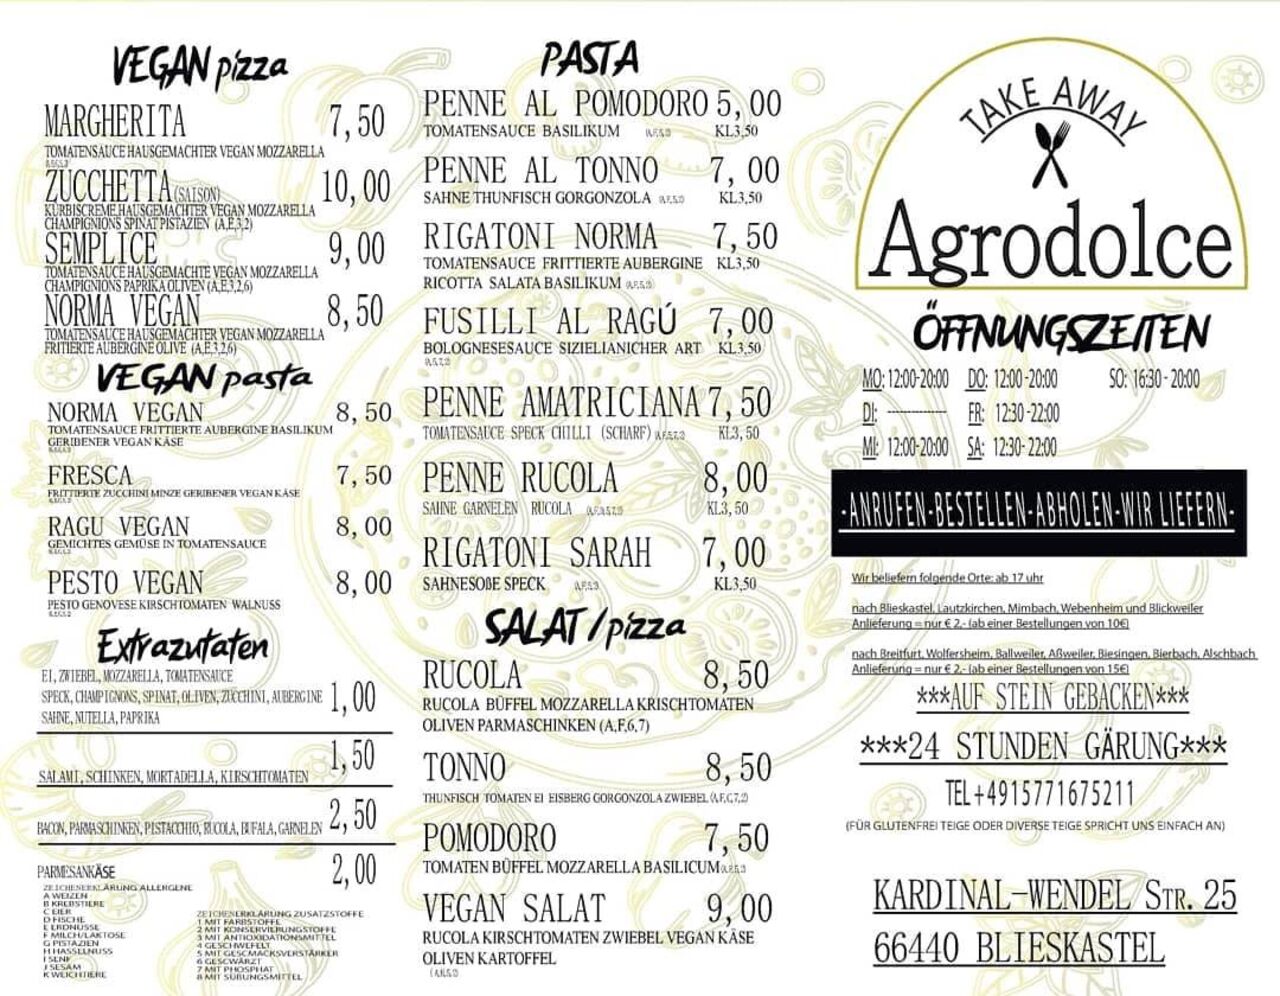 A photo of Agrodolce